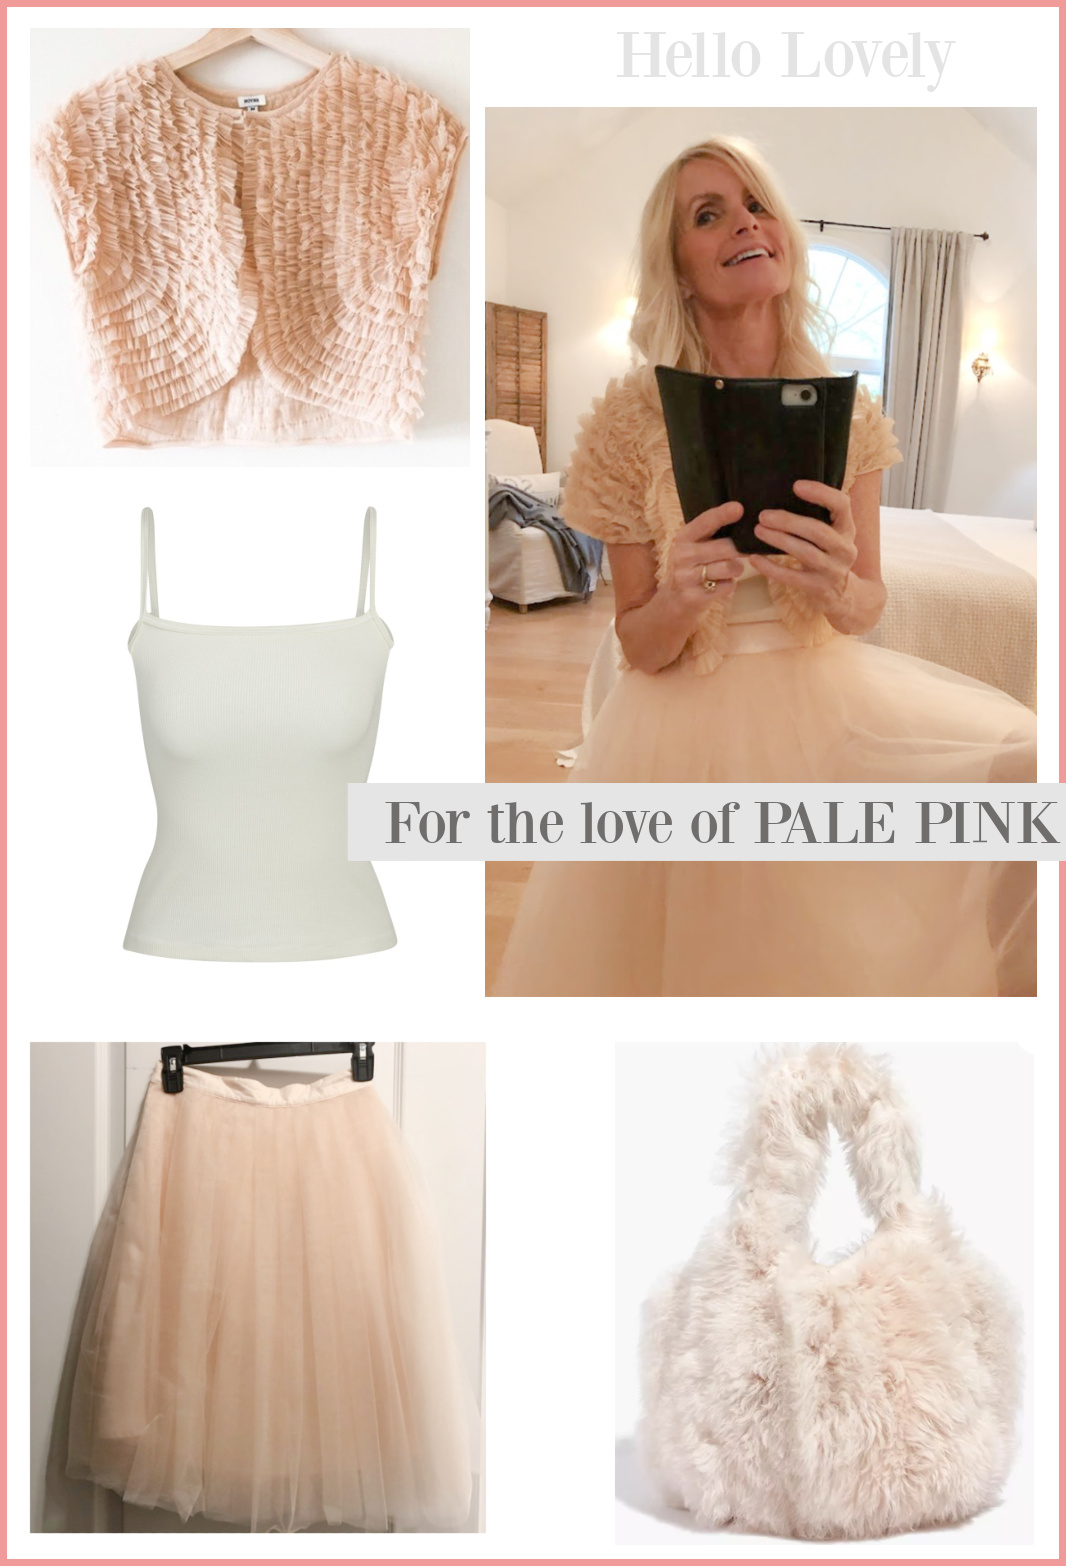 Hello Lovely for the love of pale pink - hellolovelystudio. #blushpink #getthelook #fashion